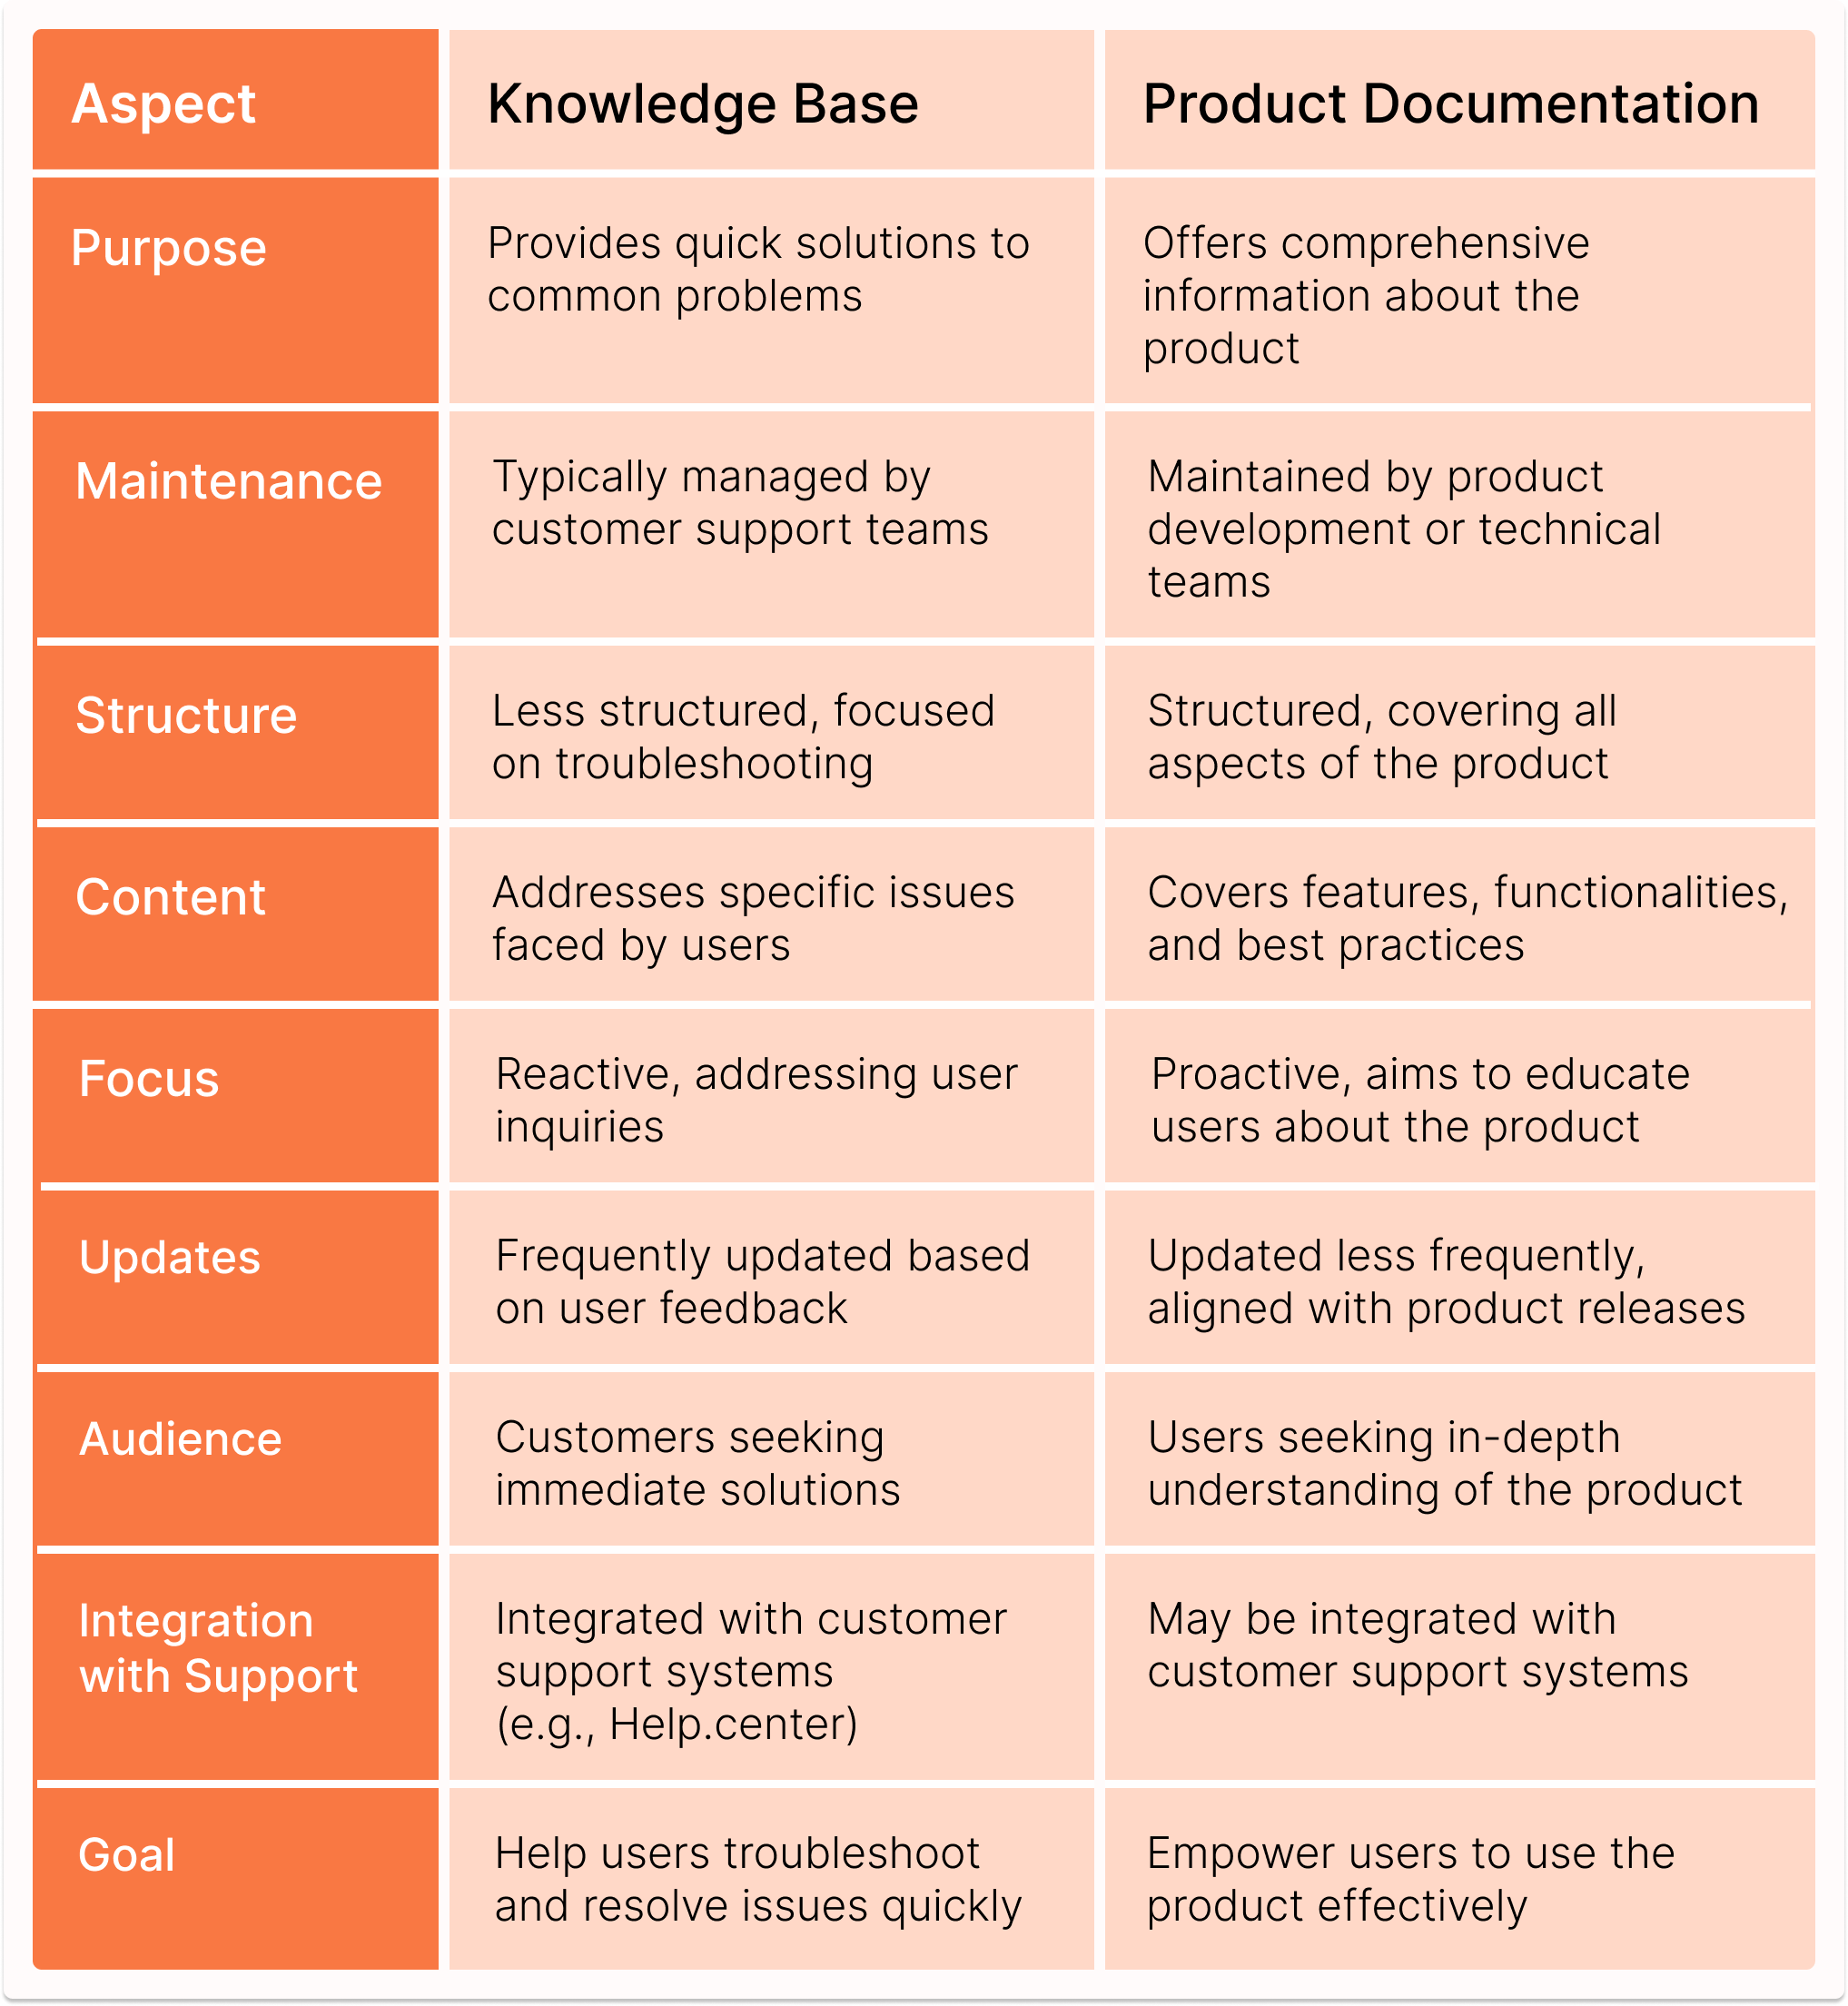 Documentation vs. Knowledge Base: What’s the Difference?